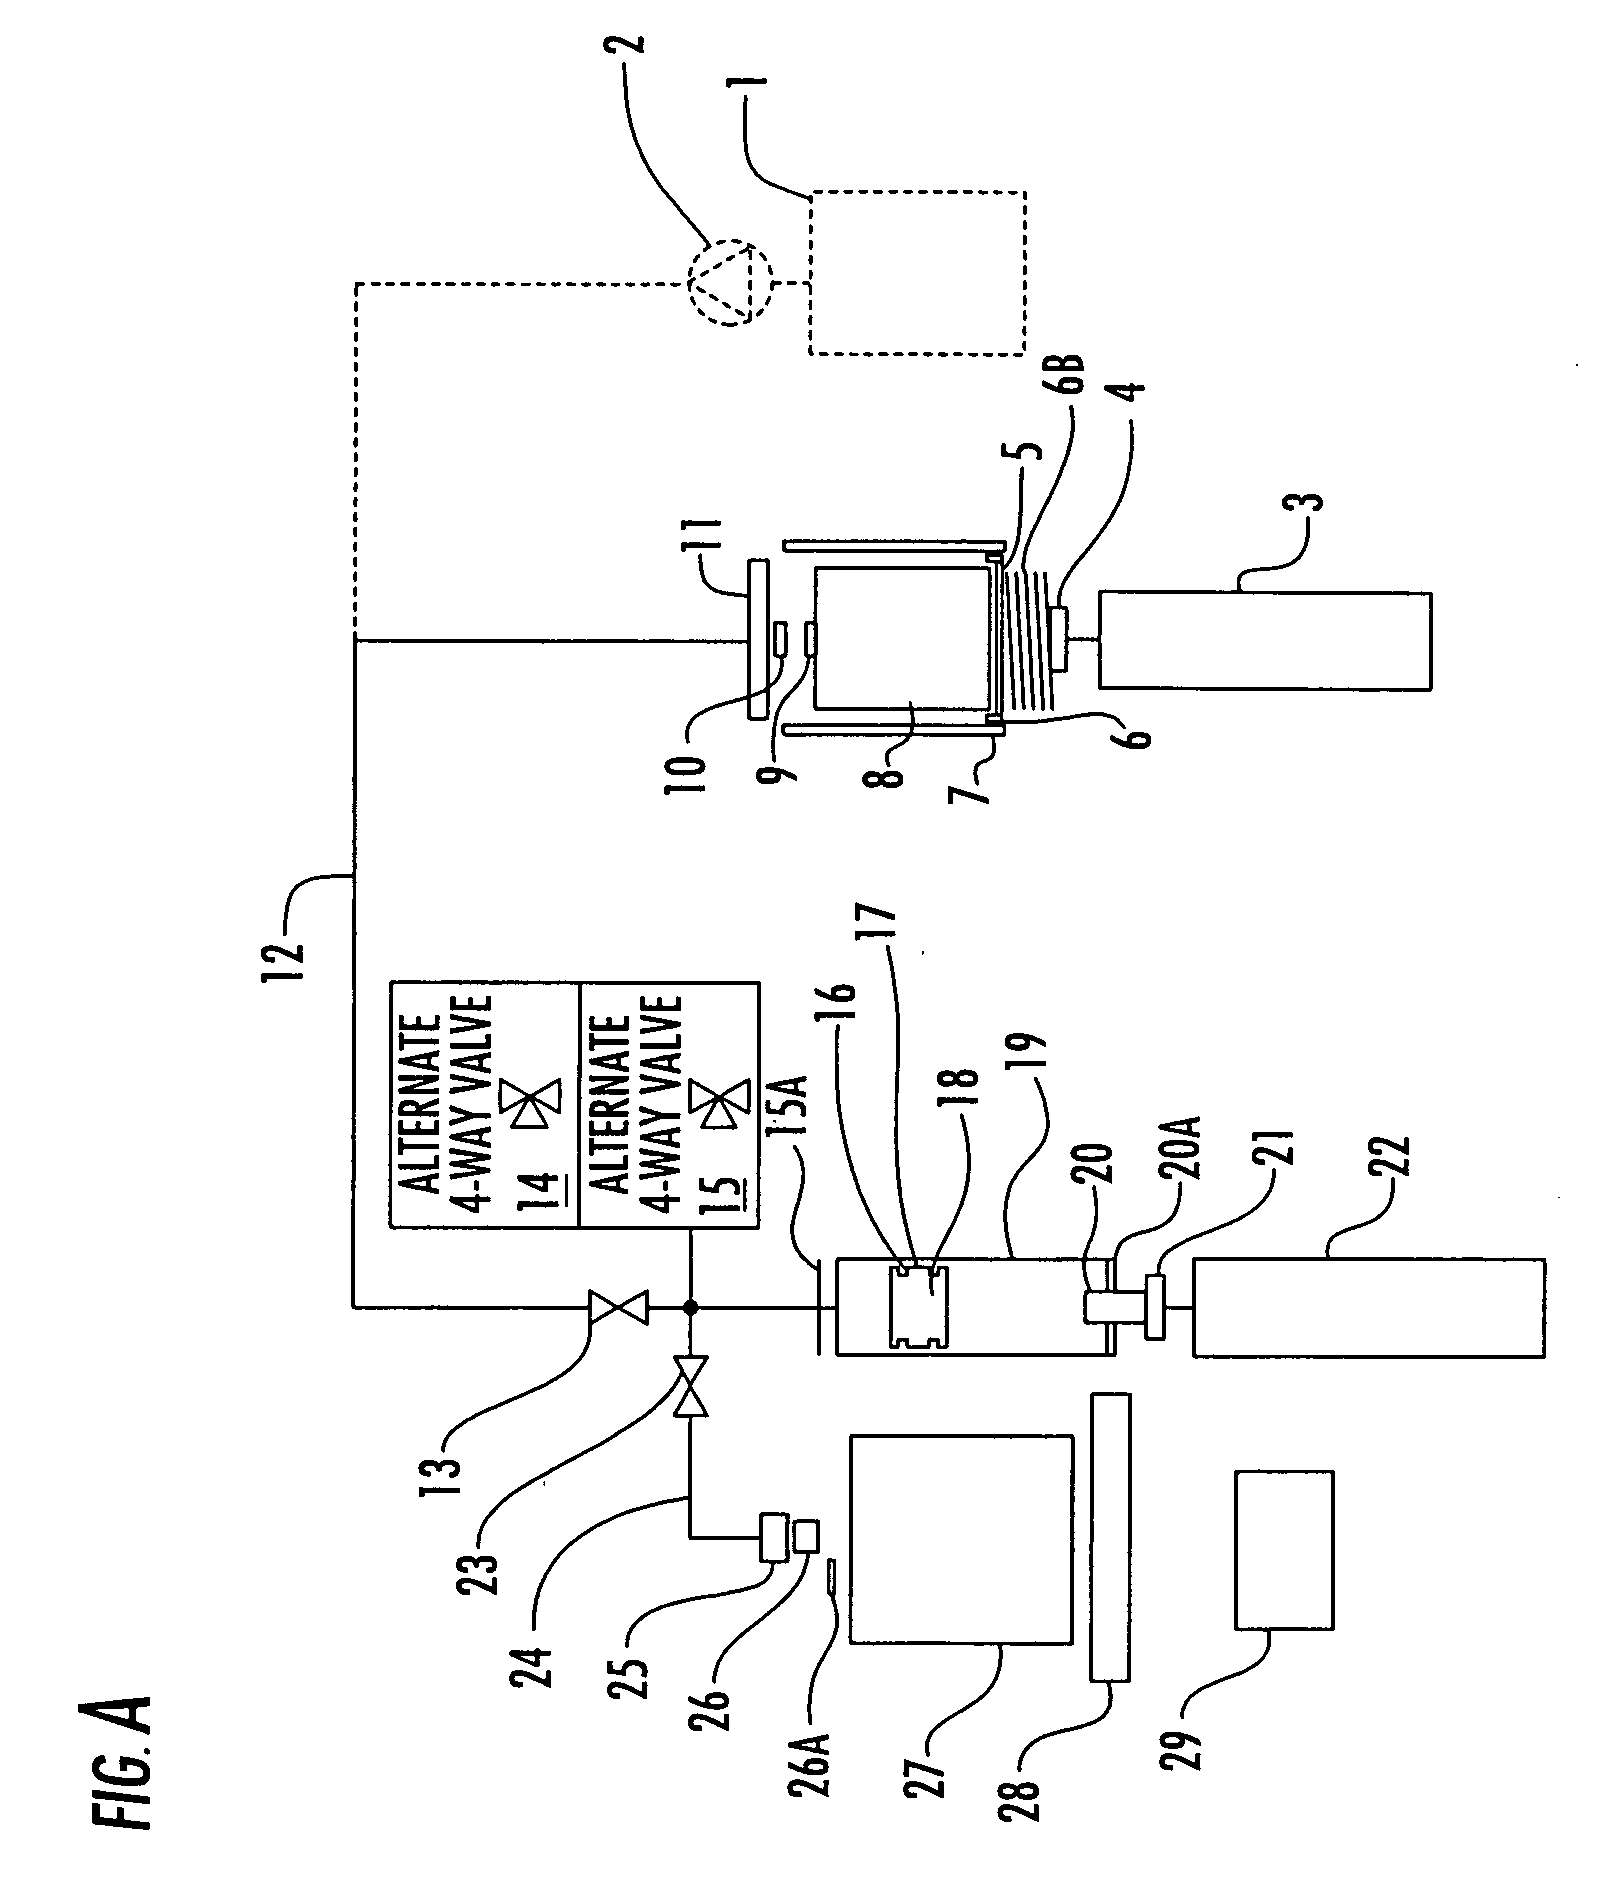 Methodology and apparatus for storing and dispensing liquid components to create custom formulations